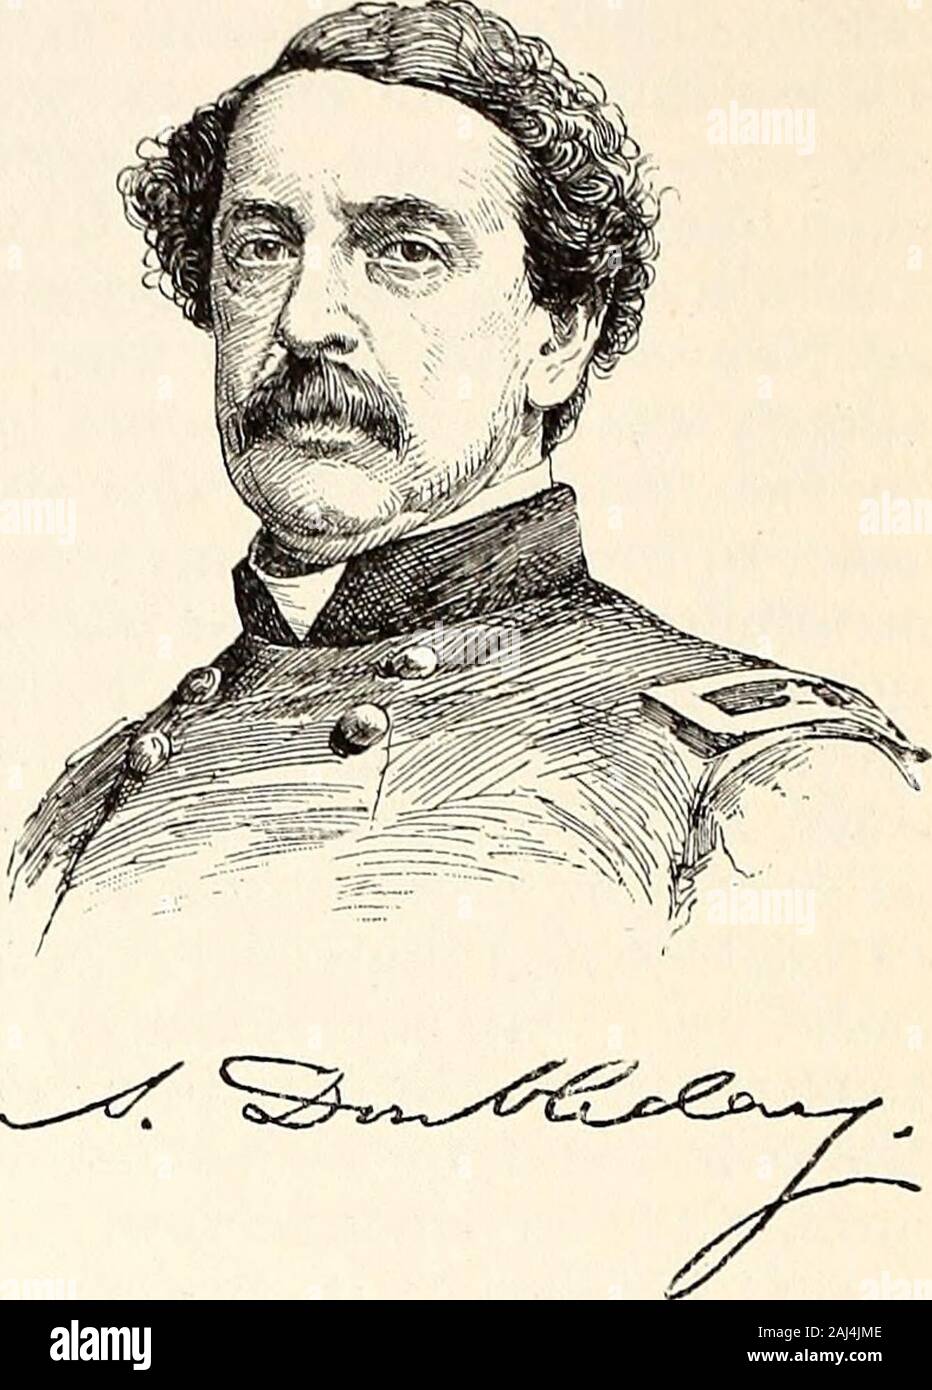 Appletons' cyclopædia of American biography . military acade-my, and on his graduation in 1842 was assigned tothe 3d artillery, lie served in the 1st artilleryduring the Mexican war. being engaged at Mon-and at Rinconada Pass during the battle ofBuena Vista, He was promoted to 1st lieutenant,:; March, 1847, to captain, ?&gt; .March, 1855, and1 against the Seminole Indians in 1856-8.as in Port Moultrie from I860 till the garrisonwithdrew to Sumter on 26 Dec. of that year, andaimed the first gun fired in defence of the latterfort on 12 April. 1861. He was promoted to majorin the 17th infantry on Stock Photo